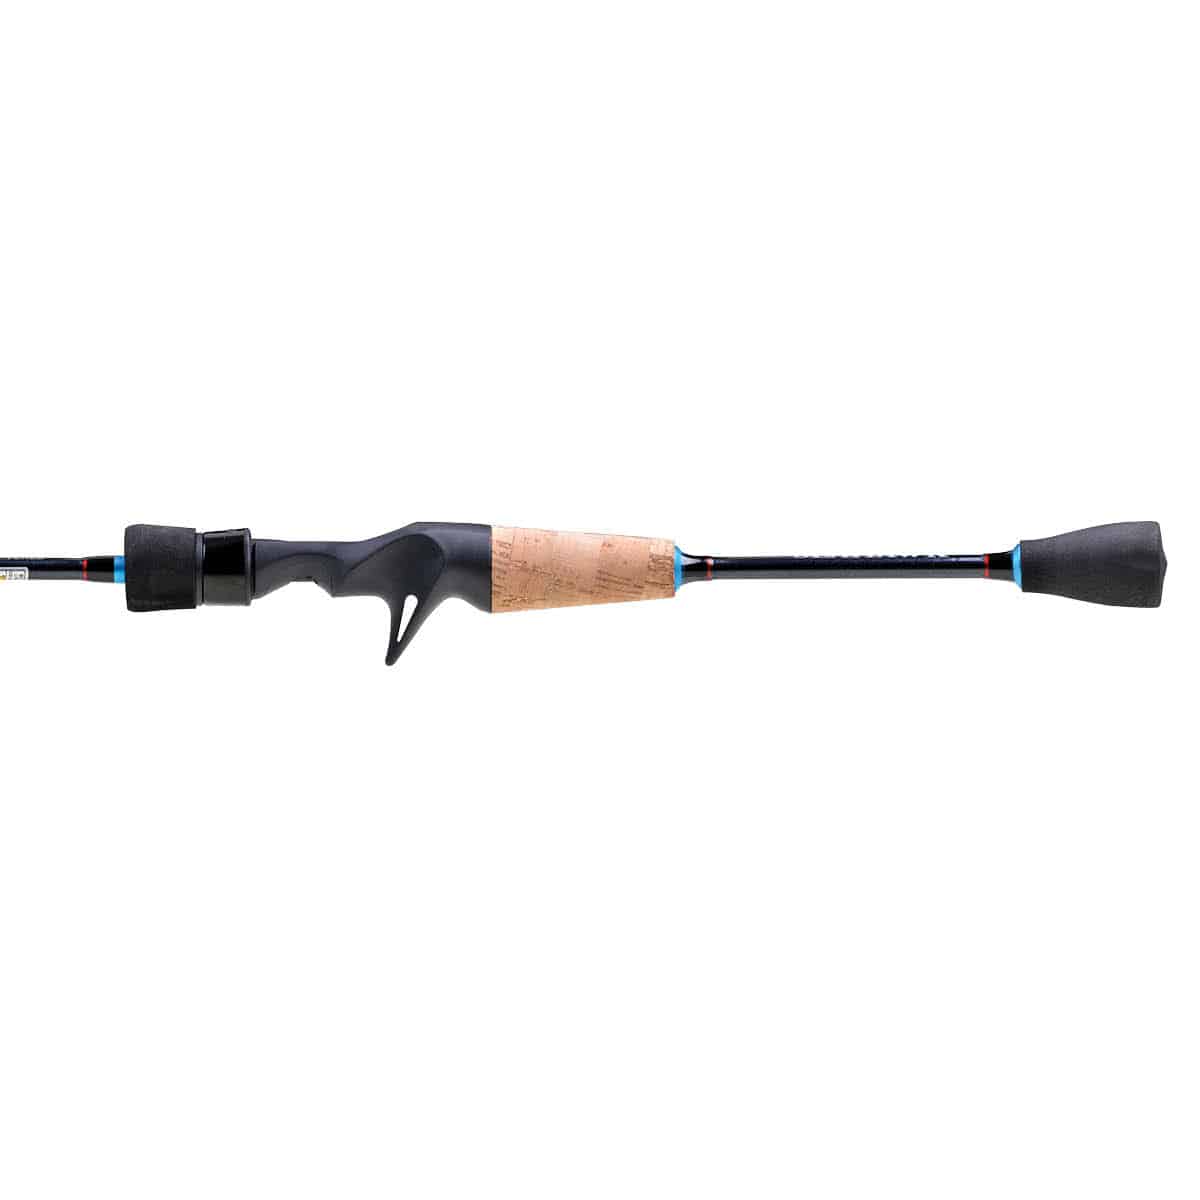 Seahawk Fishing Malaysia Flexis Ultralight Casting Rod for Ultralight Game